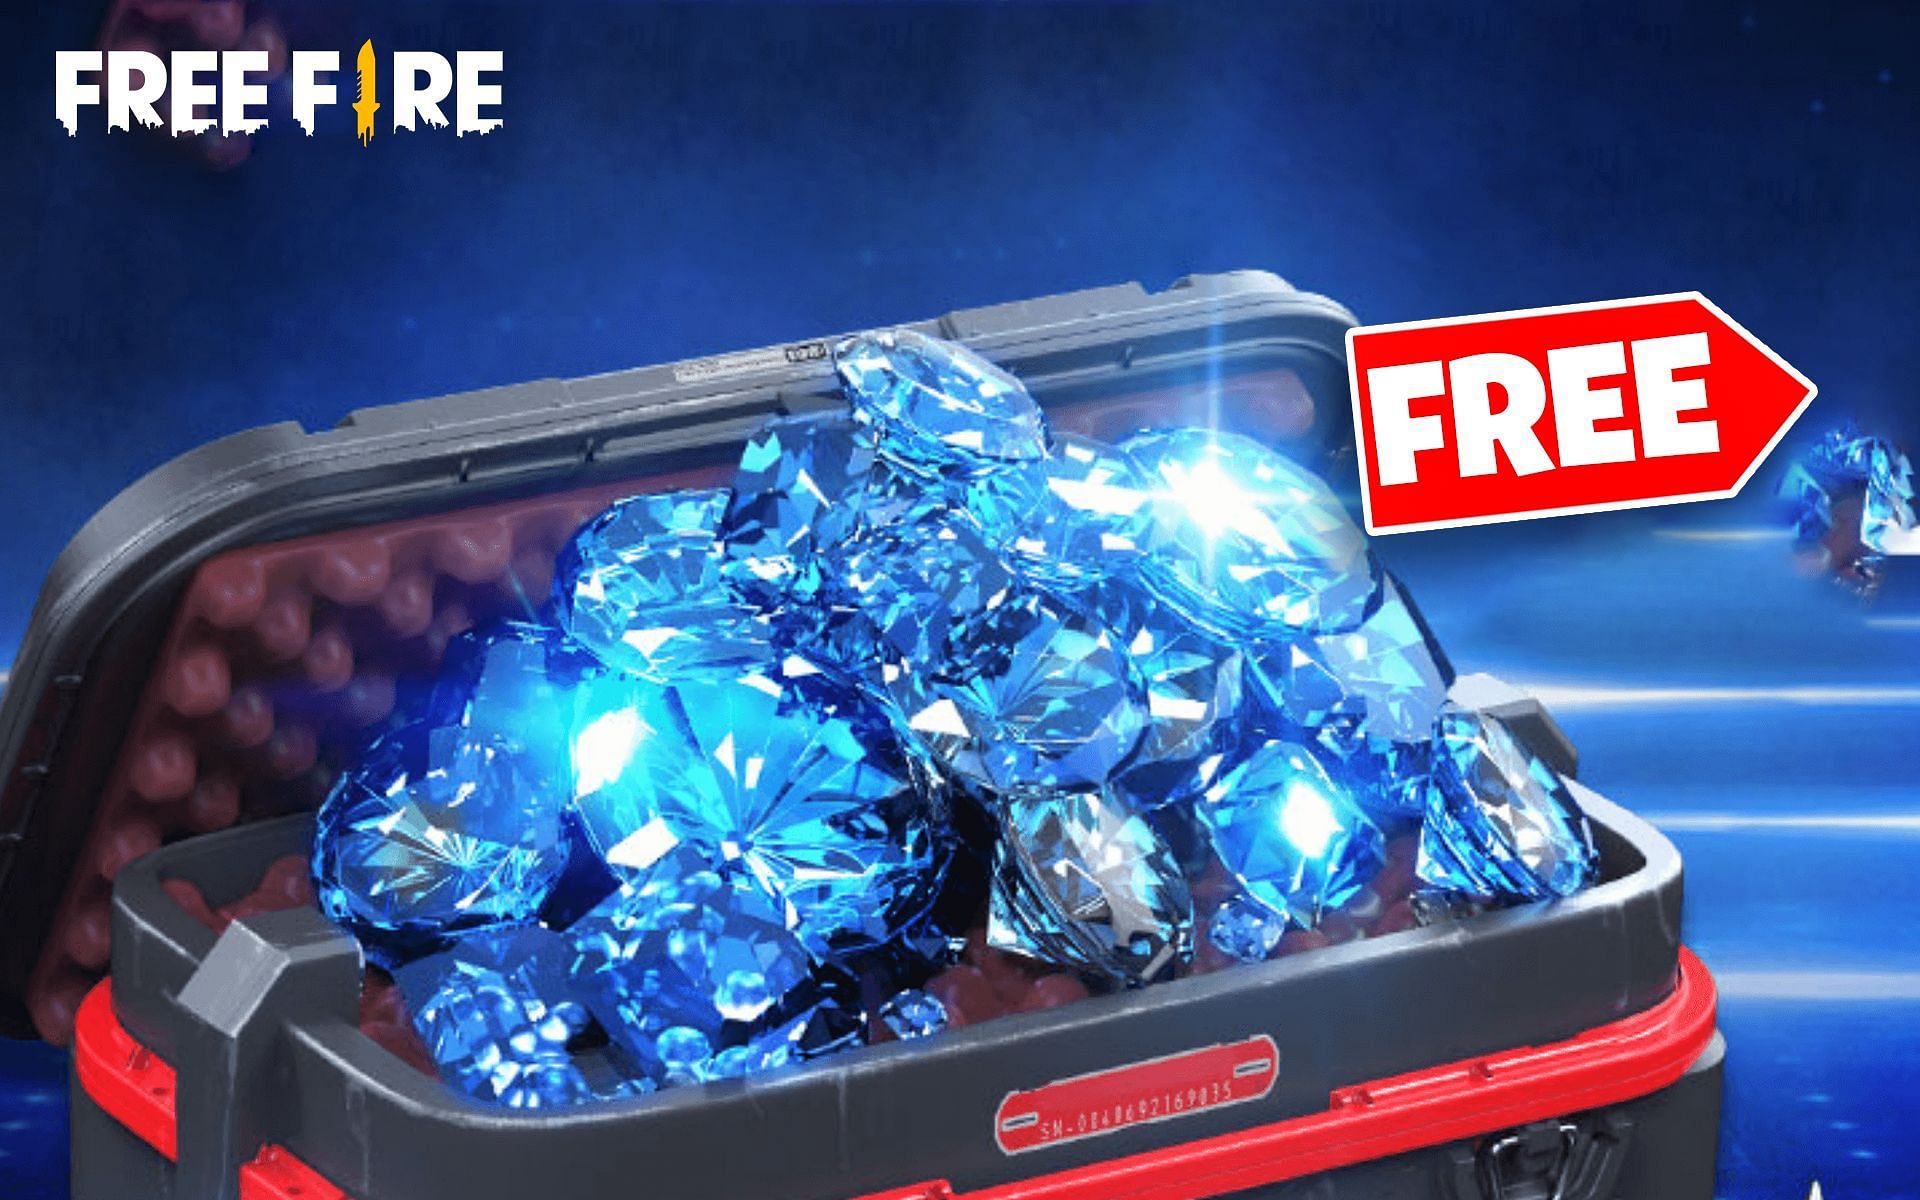 Diamonds are needed by users in Free Fire to get items like characters and more (Image via Sportskeeda)